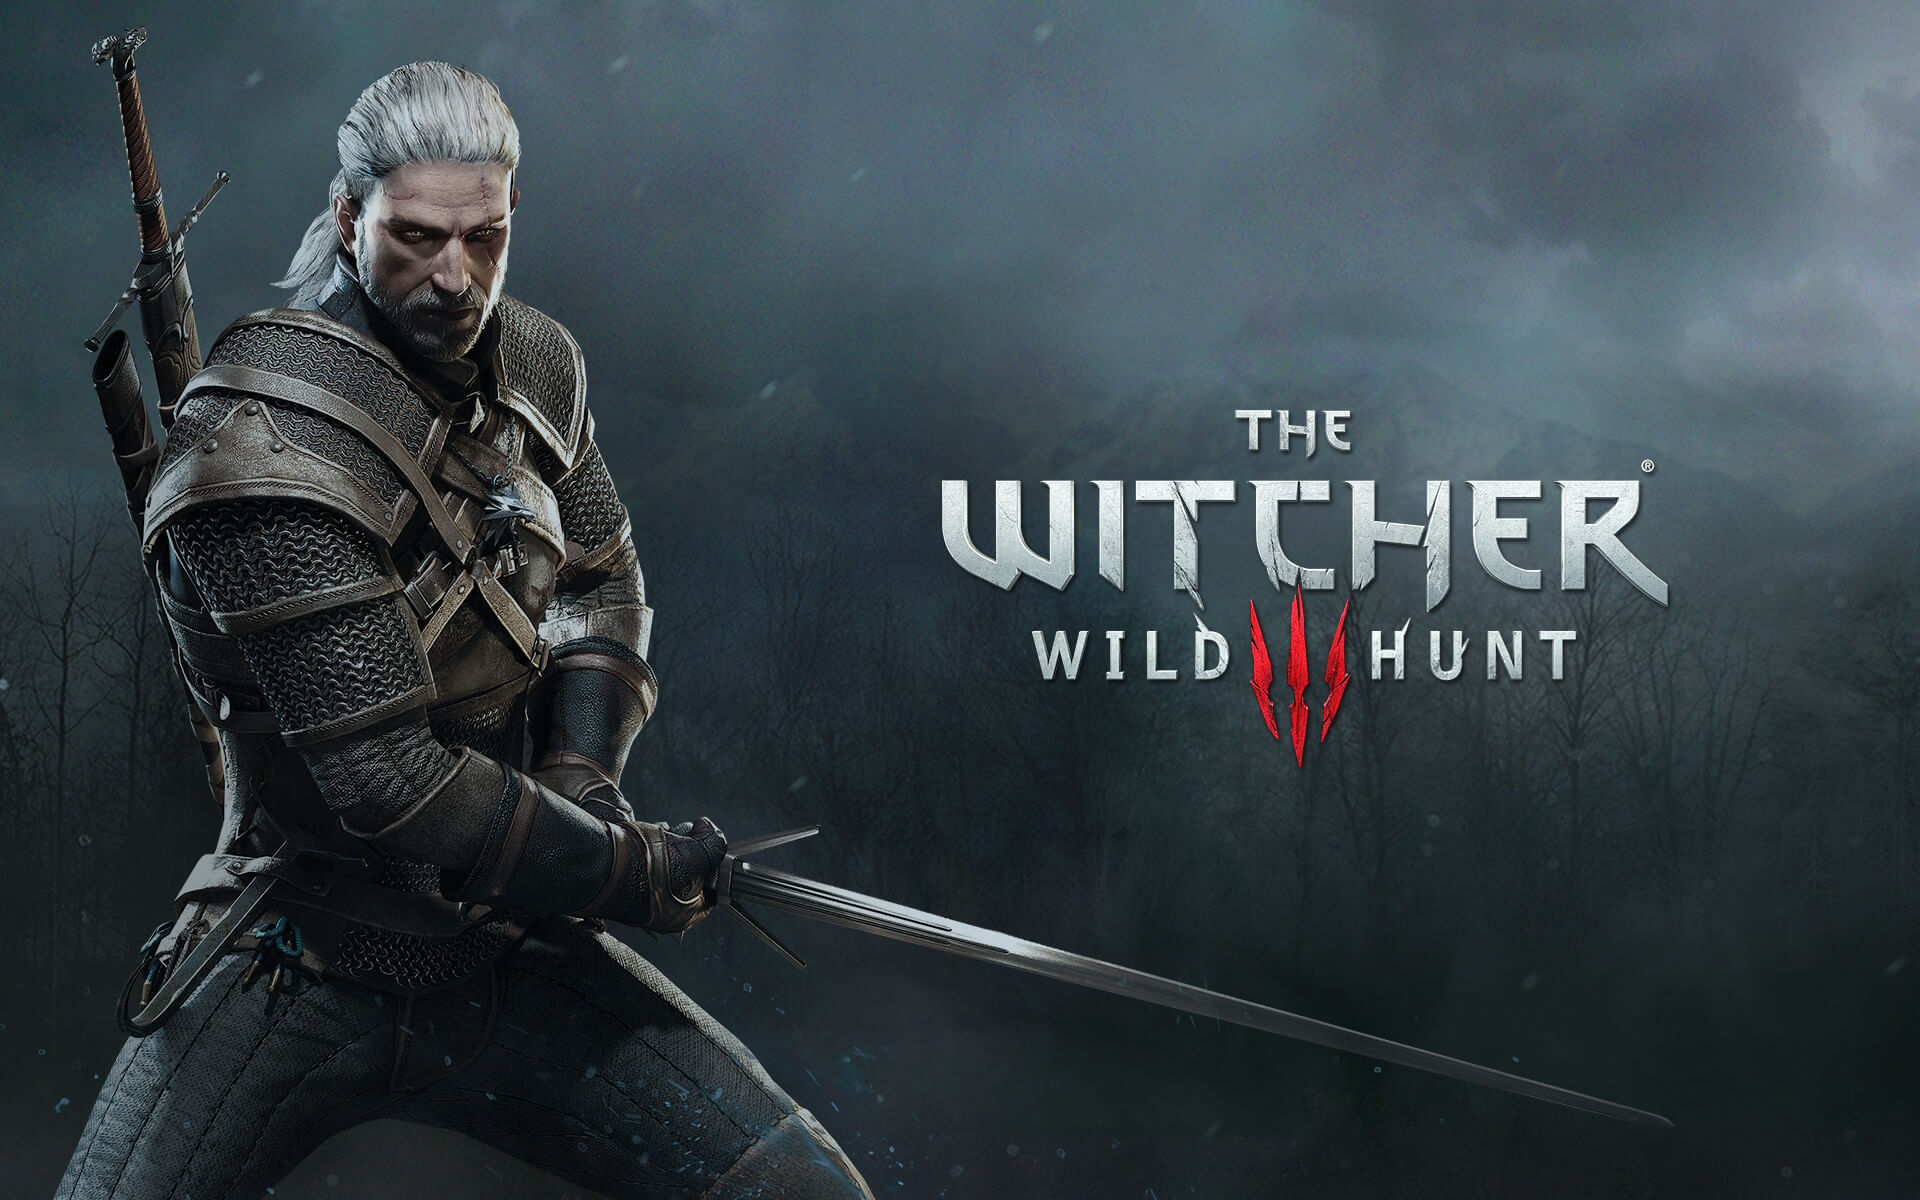 The Witcher Next Gen Releases In Q Full Content Revealed